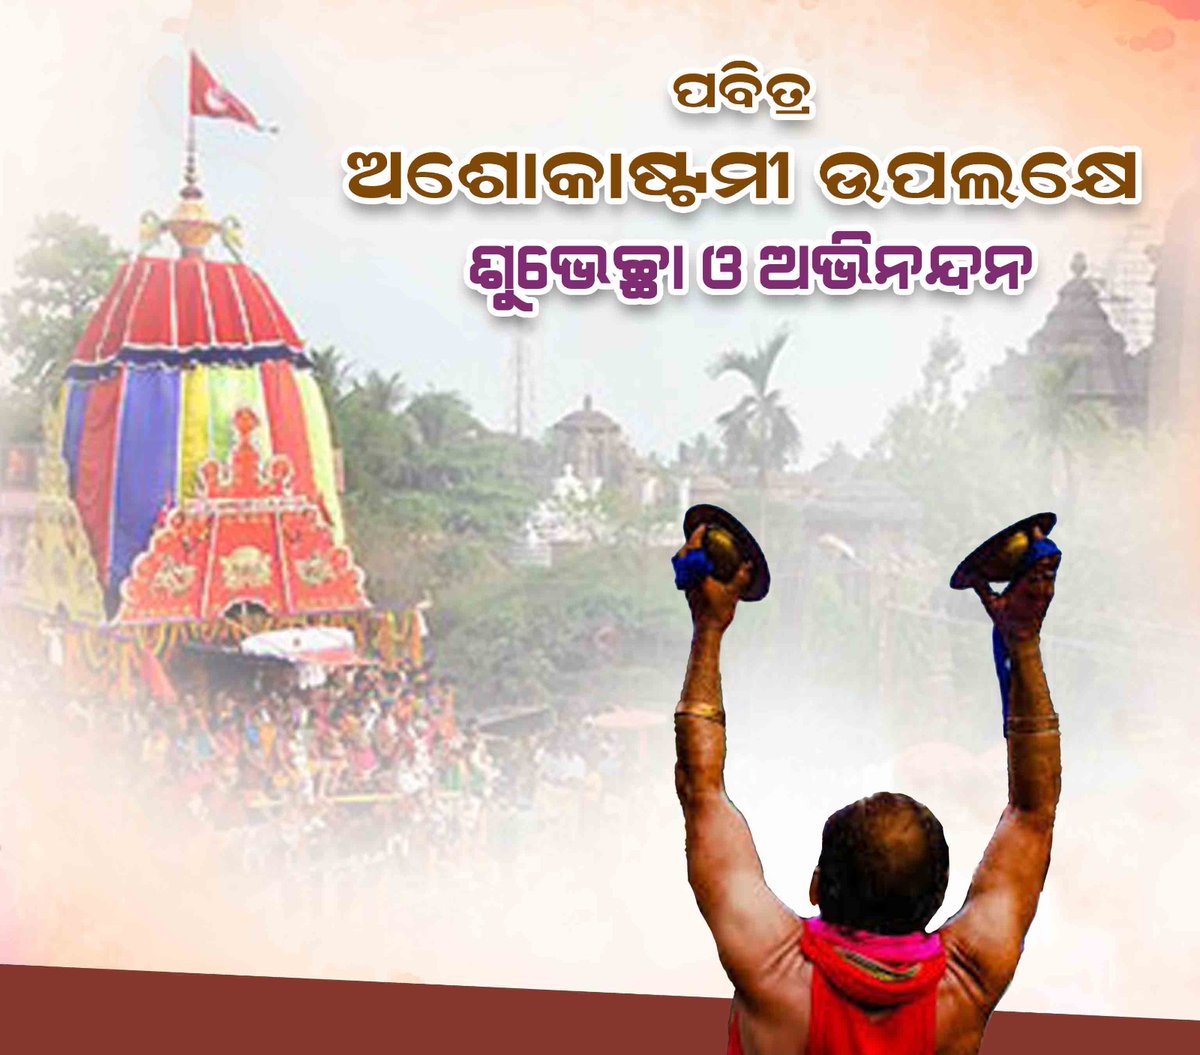 May Prabhu Lingaraj and Maa Parvati bestow peace and prosperity on everyone. Like Rukuna Rath, let's carry the rath of our lives by diminishing the evils inside us.
Happy Ashokastami!